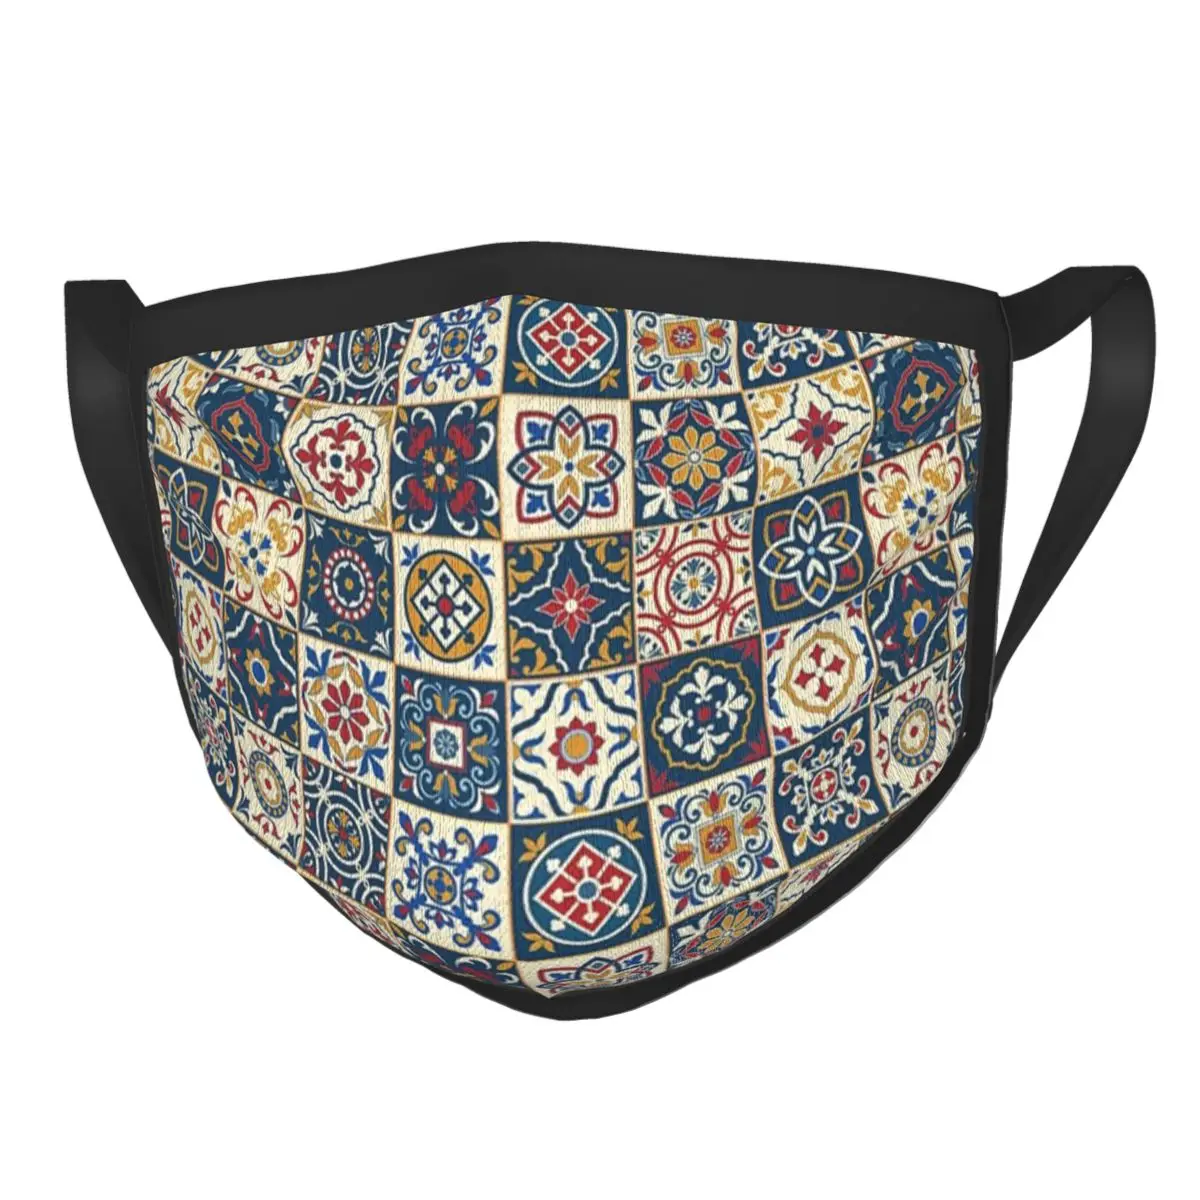 

Moroccan Tiles Pattern Reusable Face Mask Retro Morocco Style Anti Haze Dustproof Mask Protection Mask Respirator Mouth Muffle